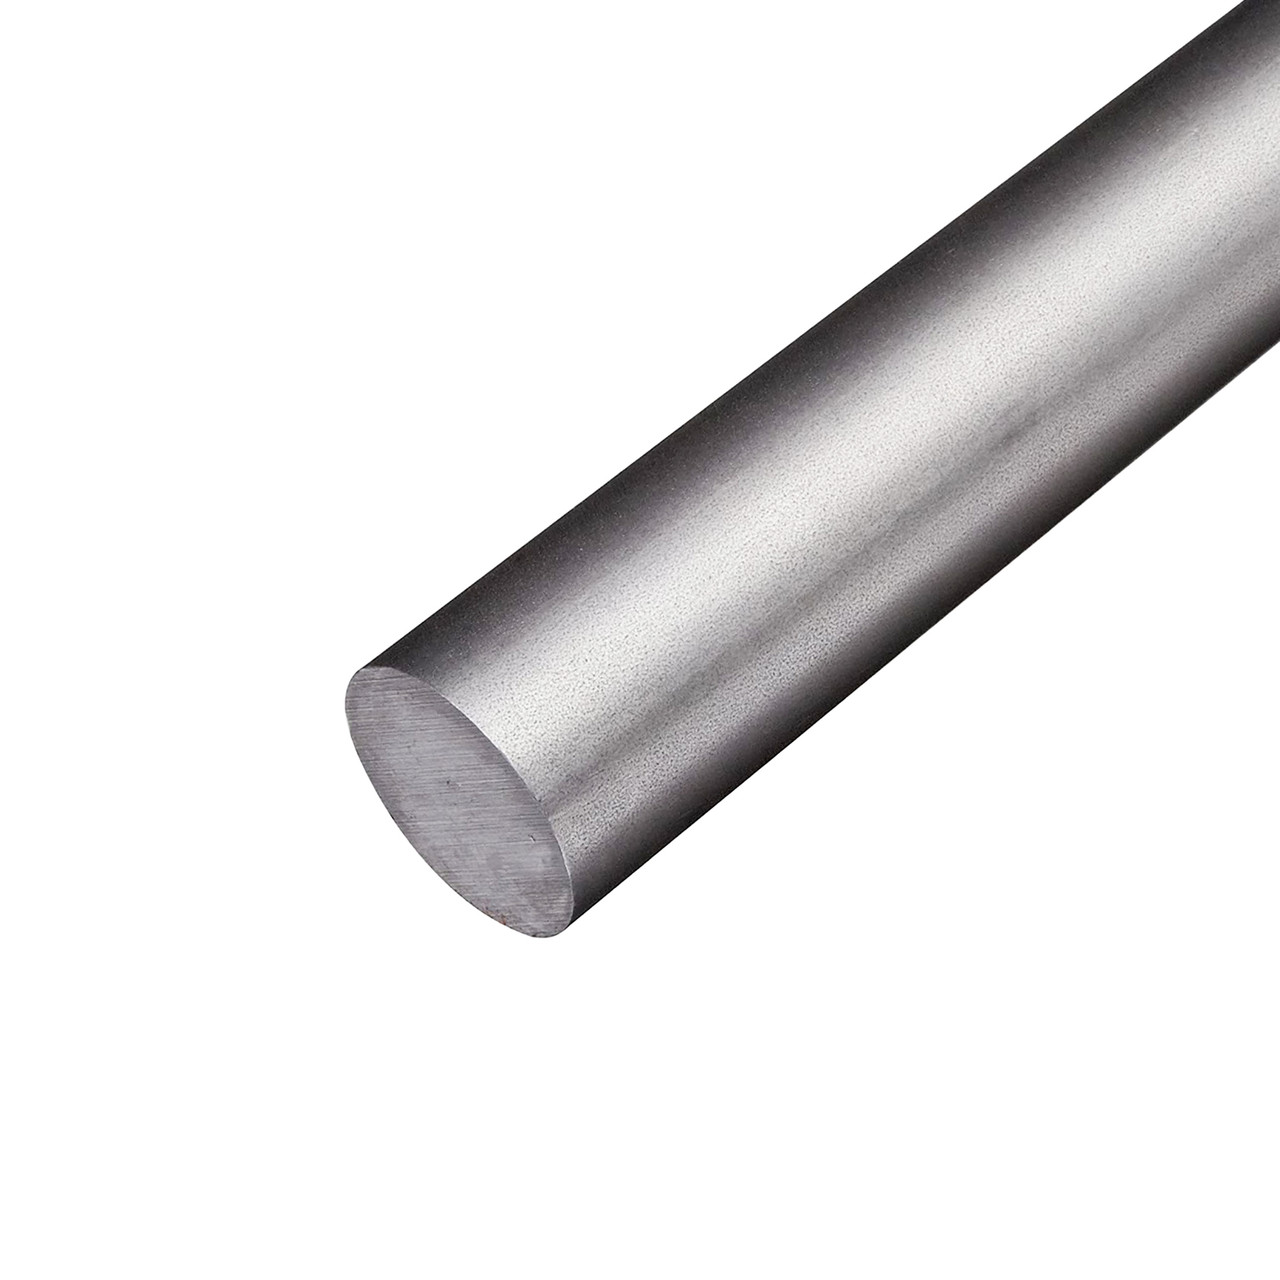 1.375 (1-3/8 inch) x 12 inches, 8620 Alloy Steel Round Rod, Cold Finished